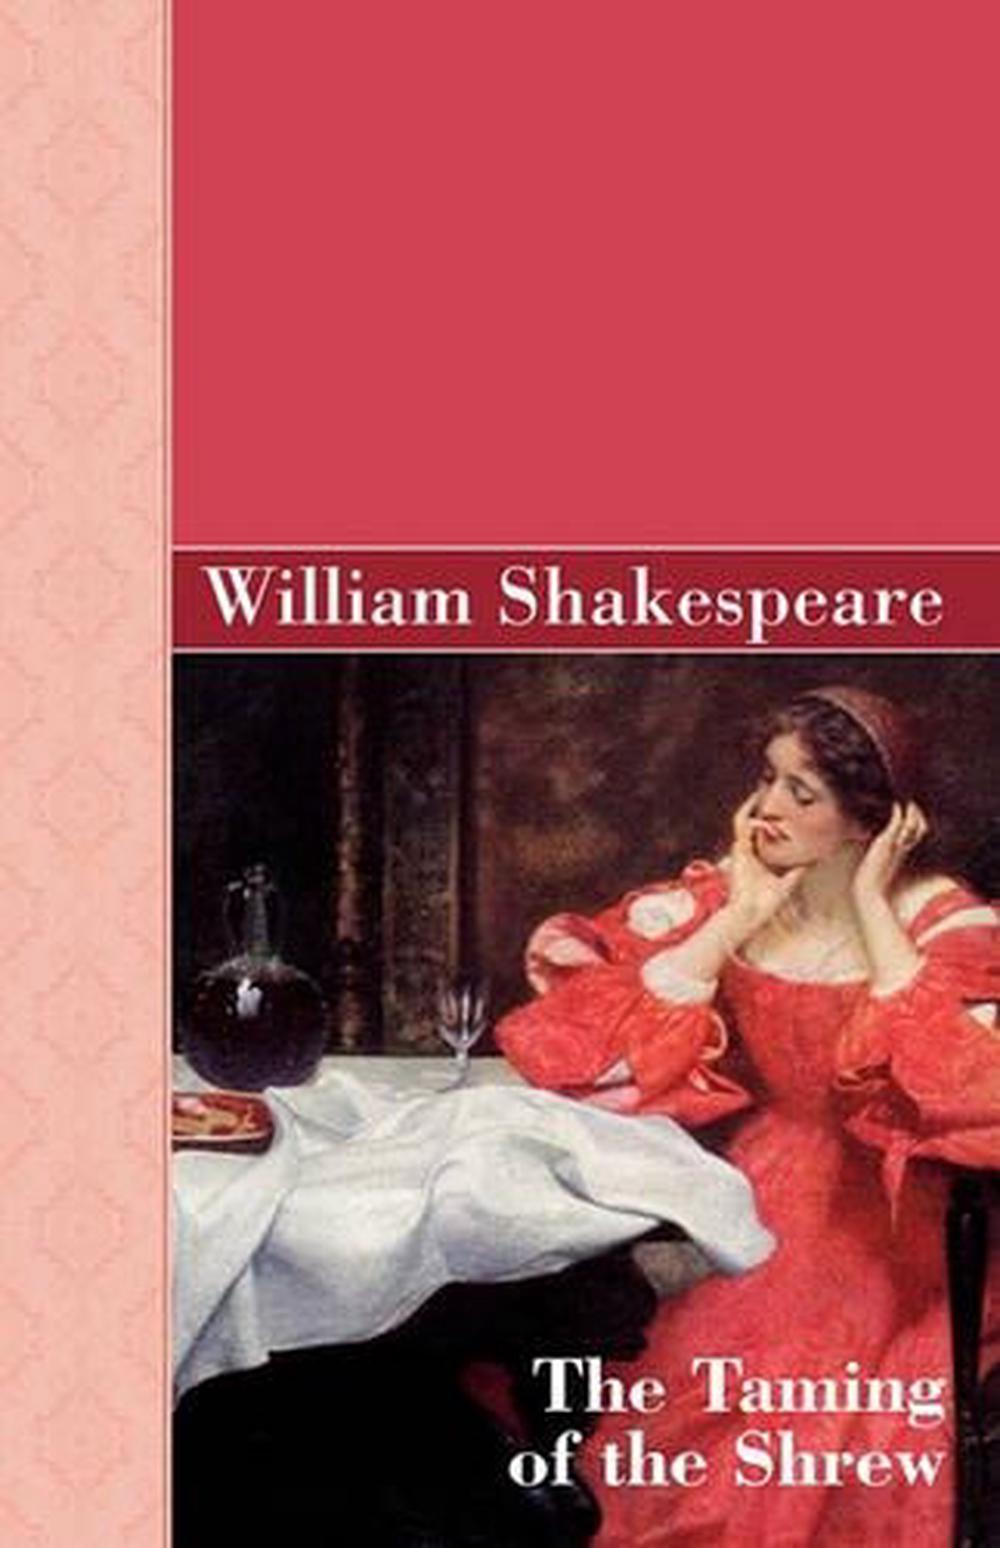 the taming of the shrew by william shakespeare